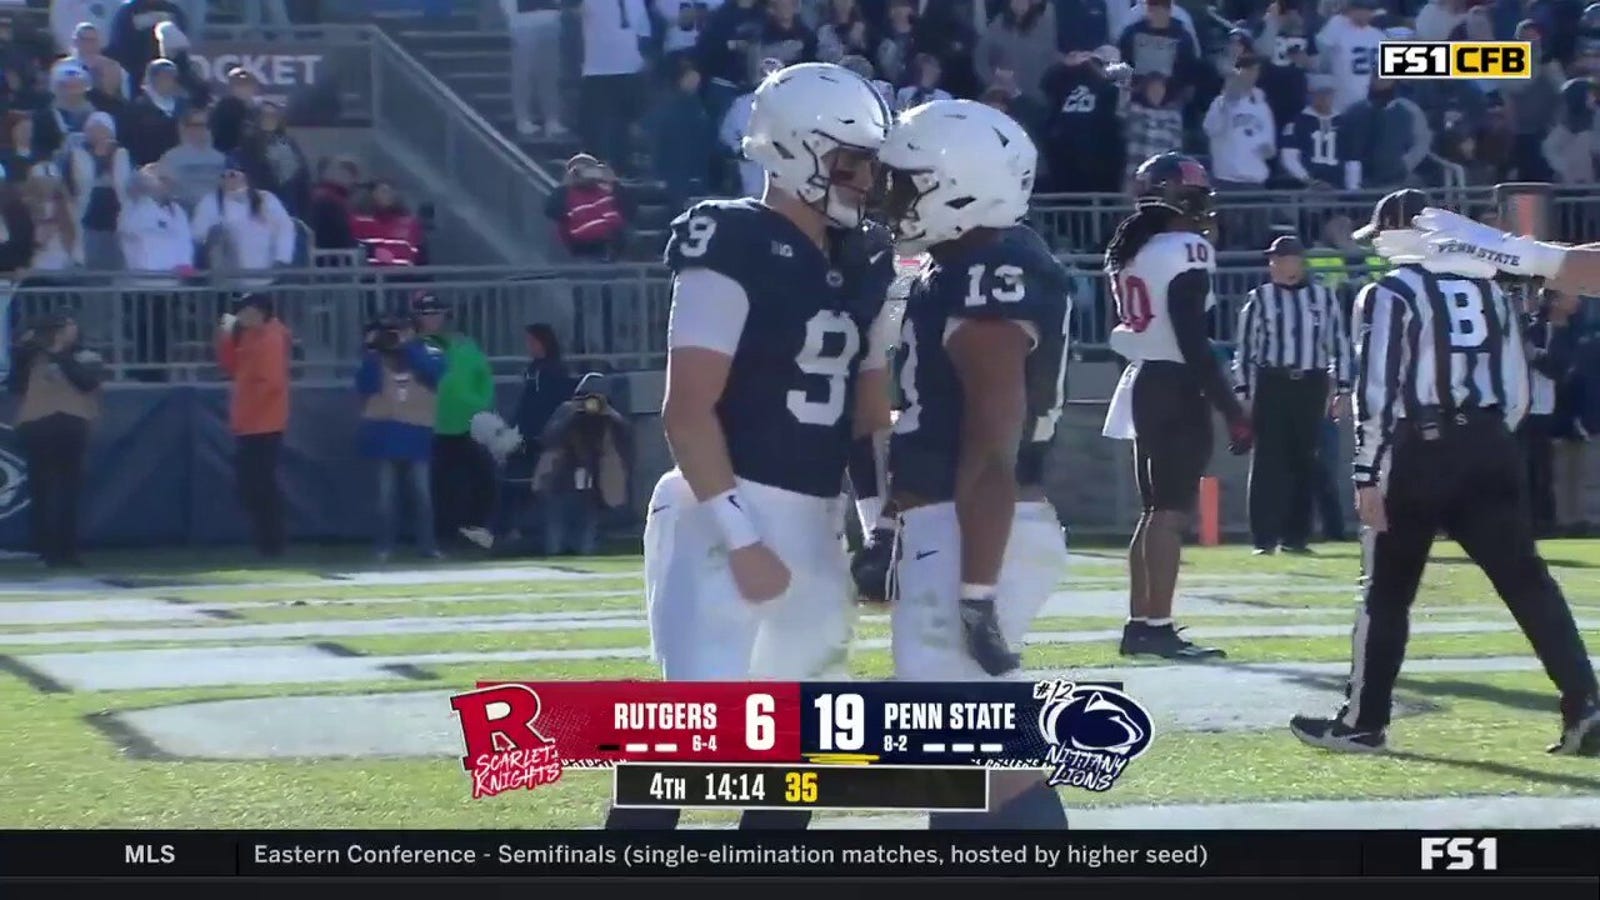 Kayrton Allen punches in a 3-yard TD to help extend Penn State's lead